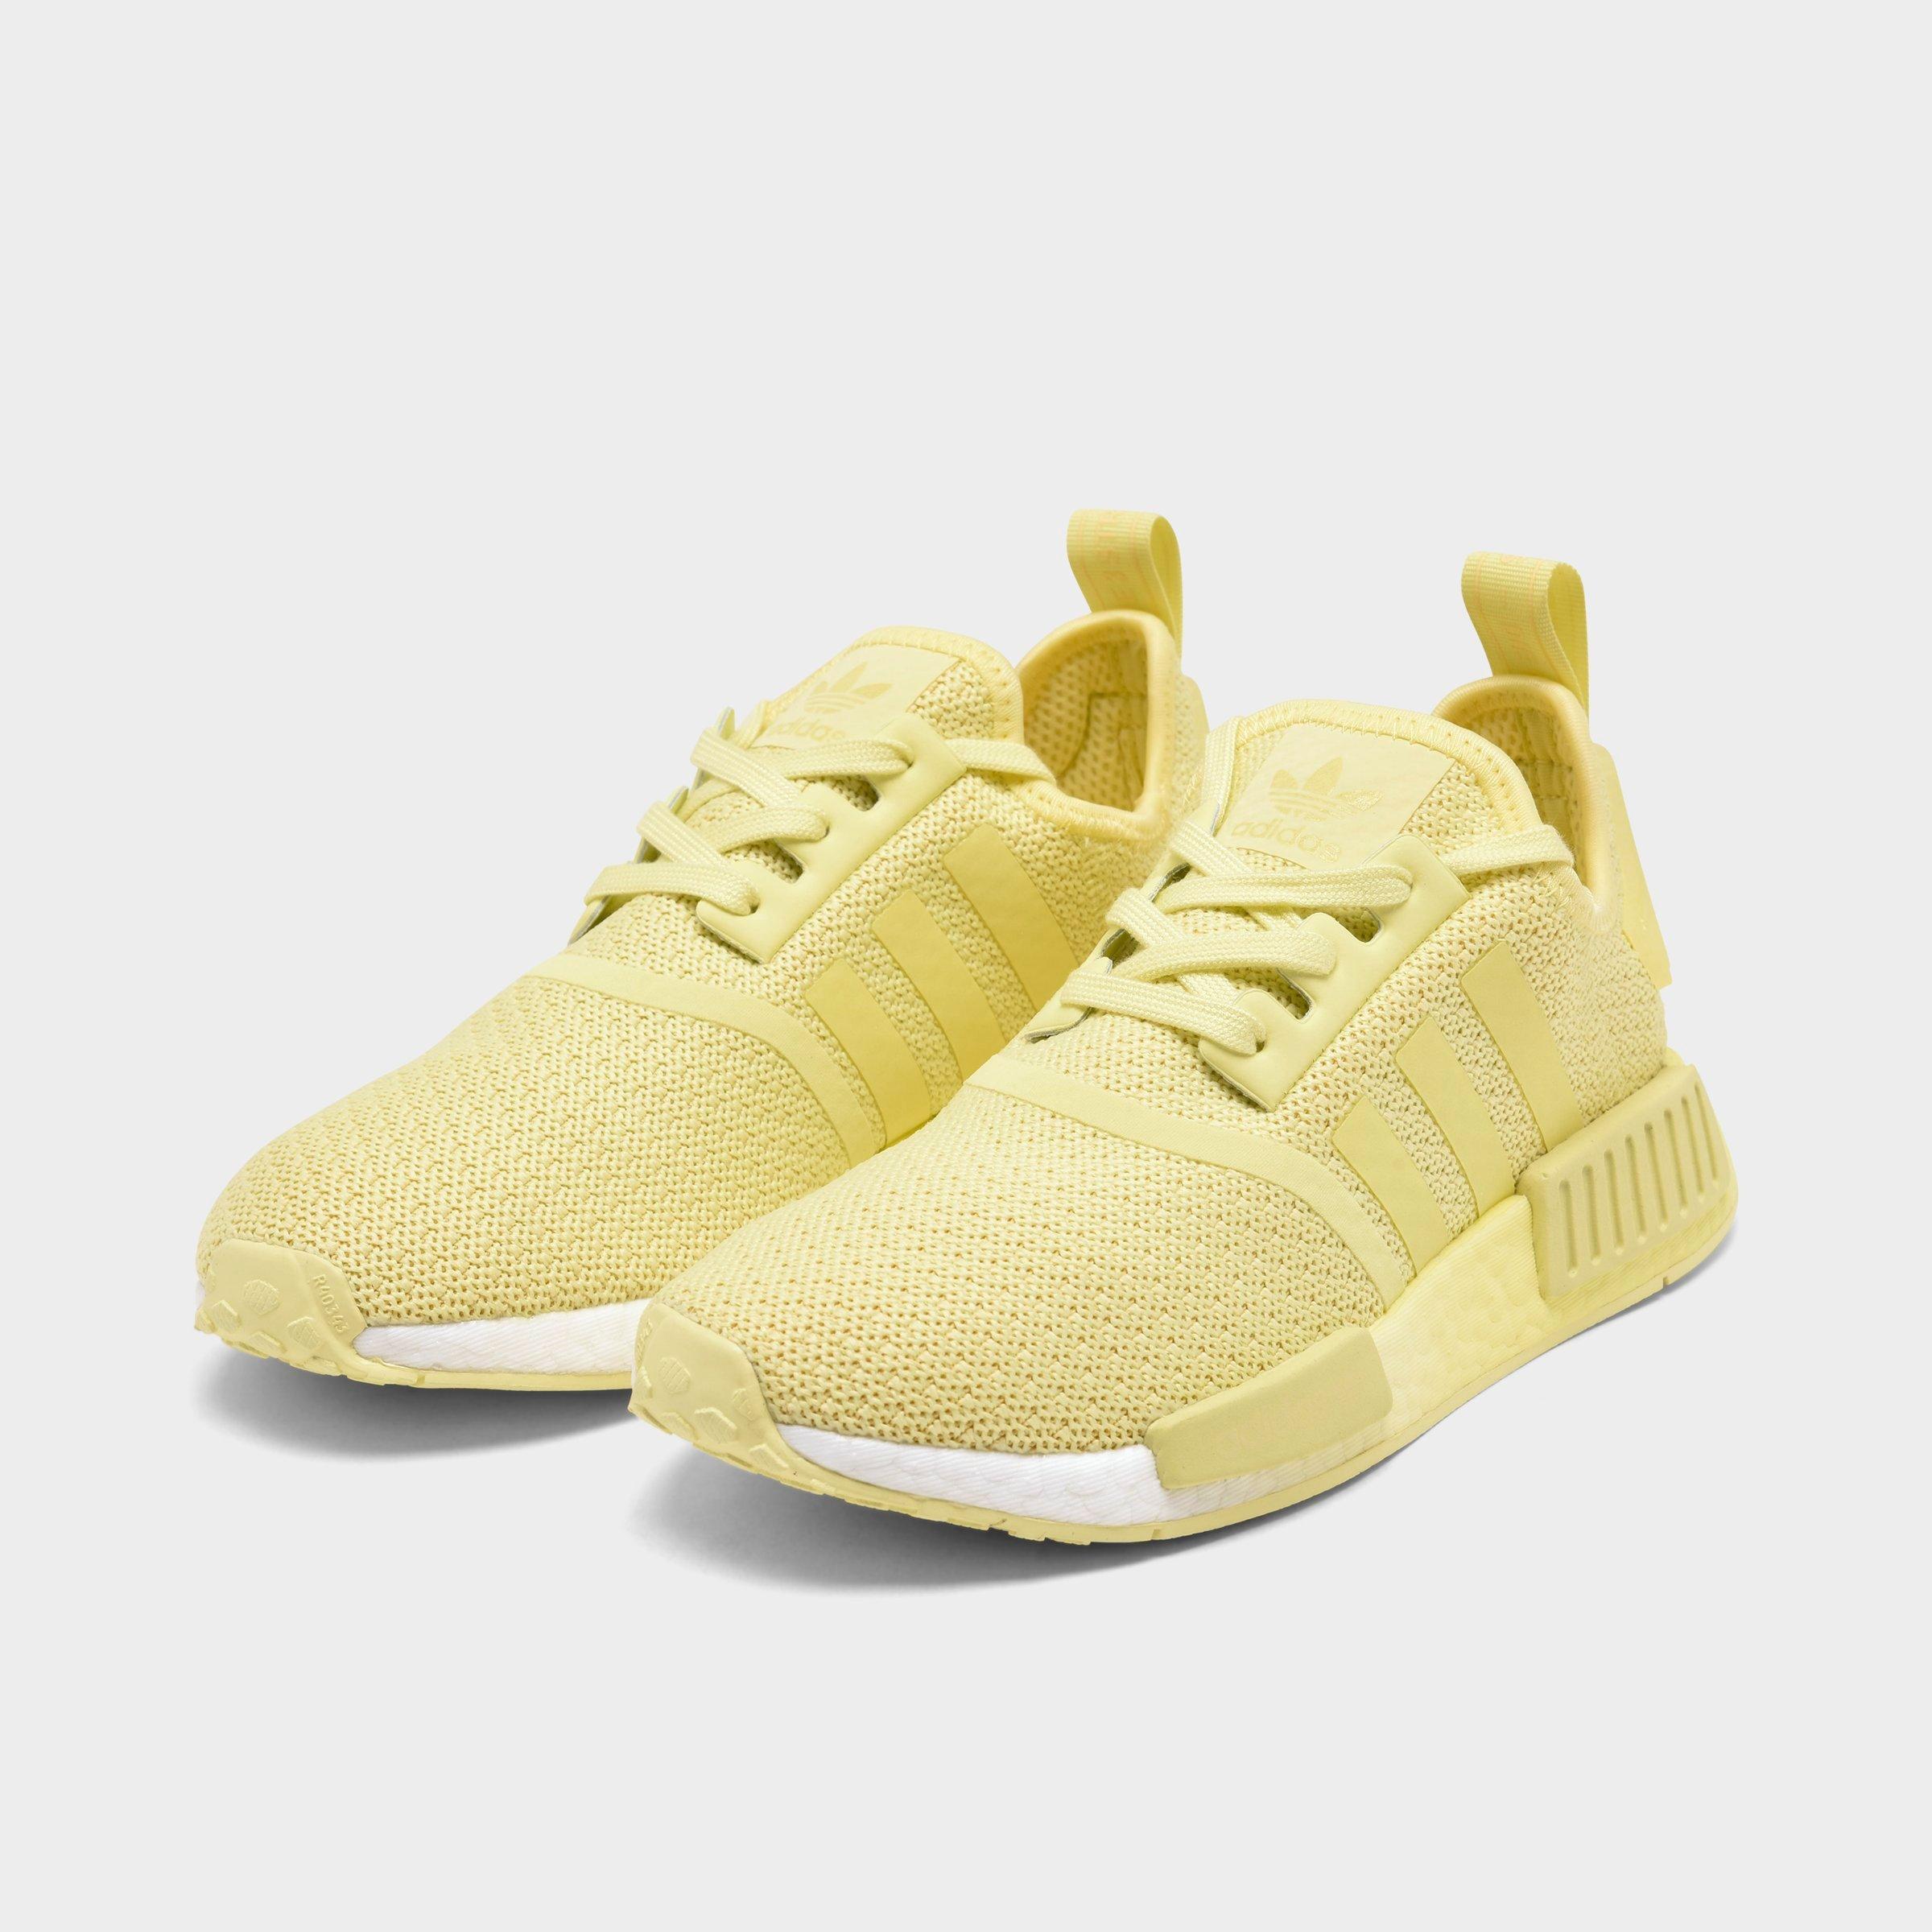 Women's adidas Originals NMD R1 Casual Shoes| JD Sports